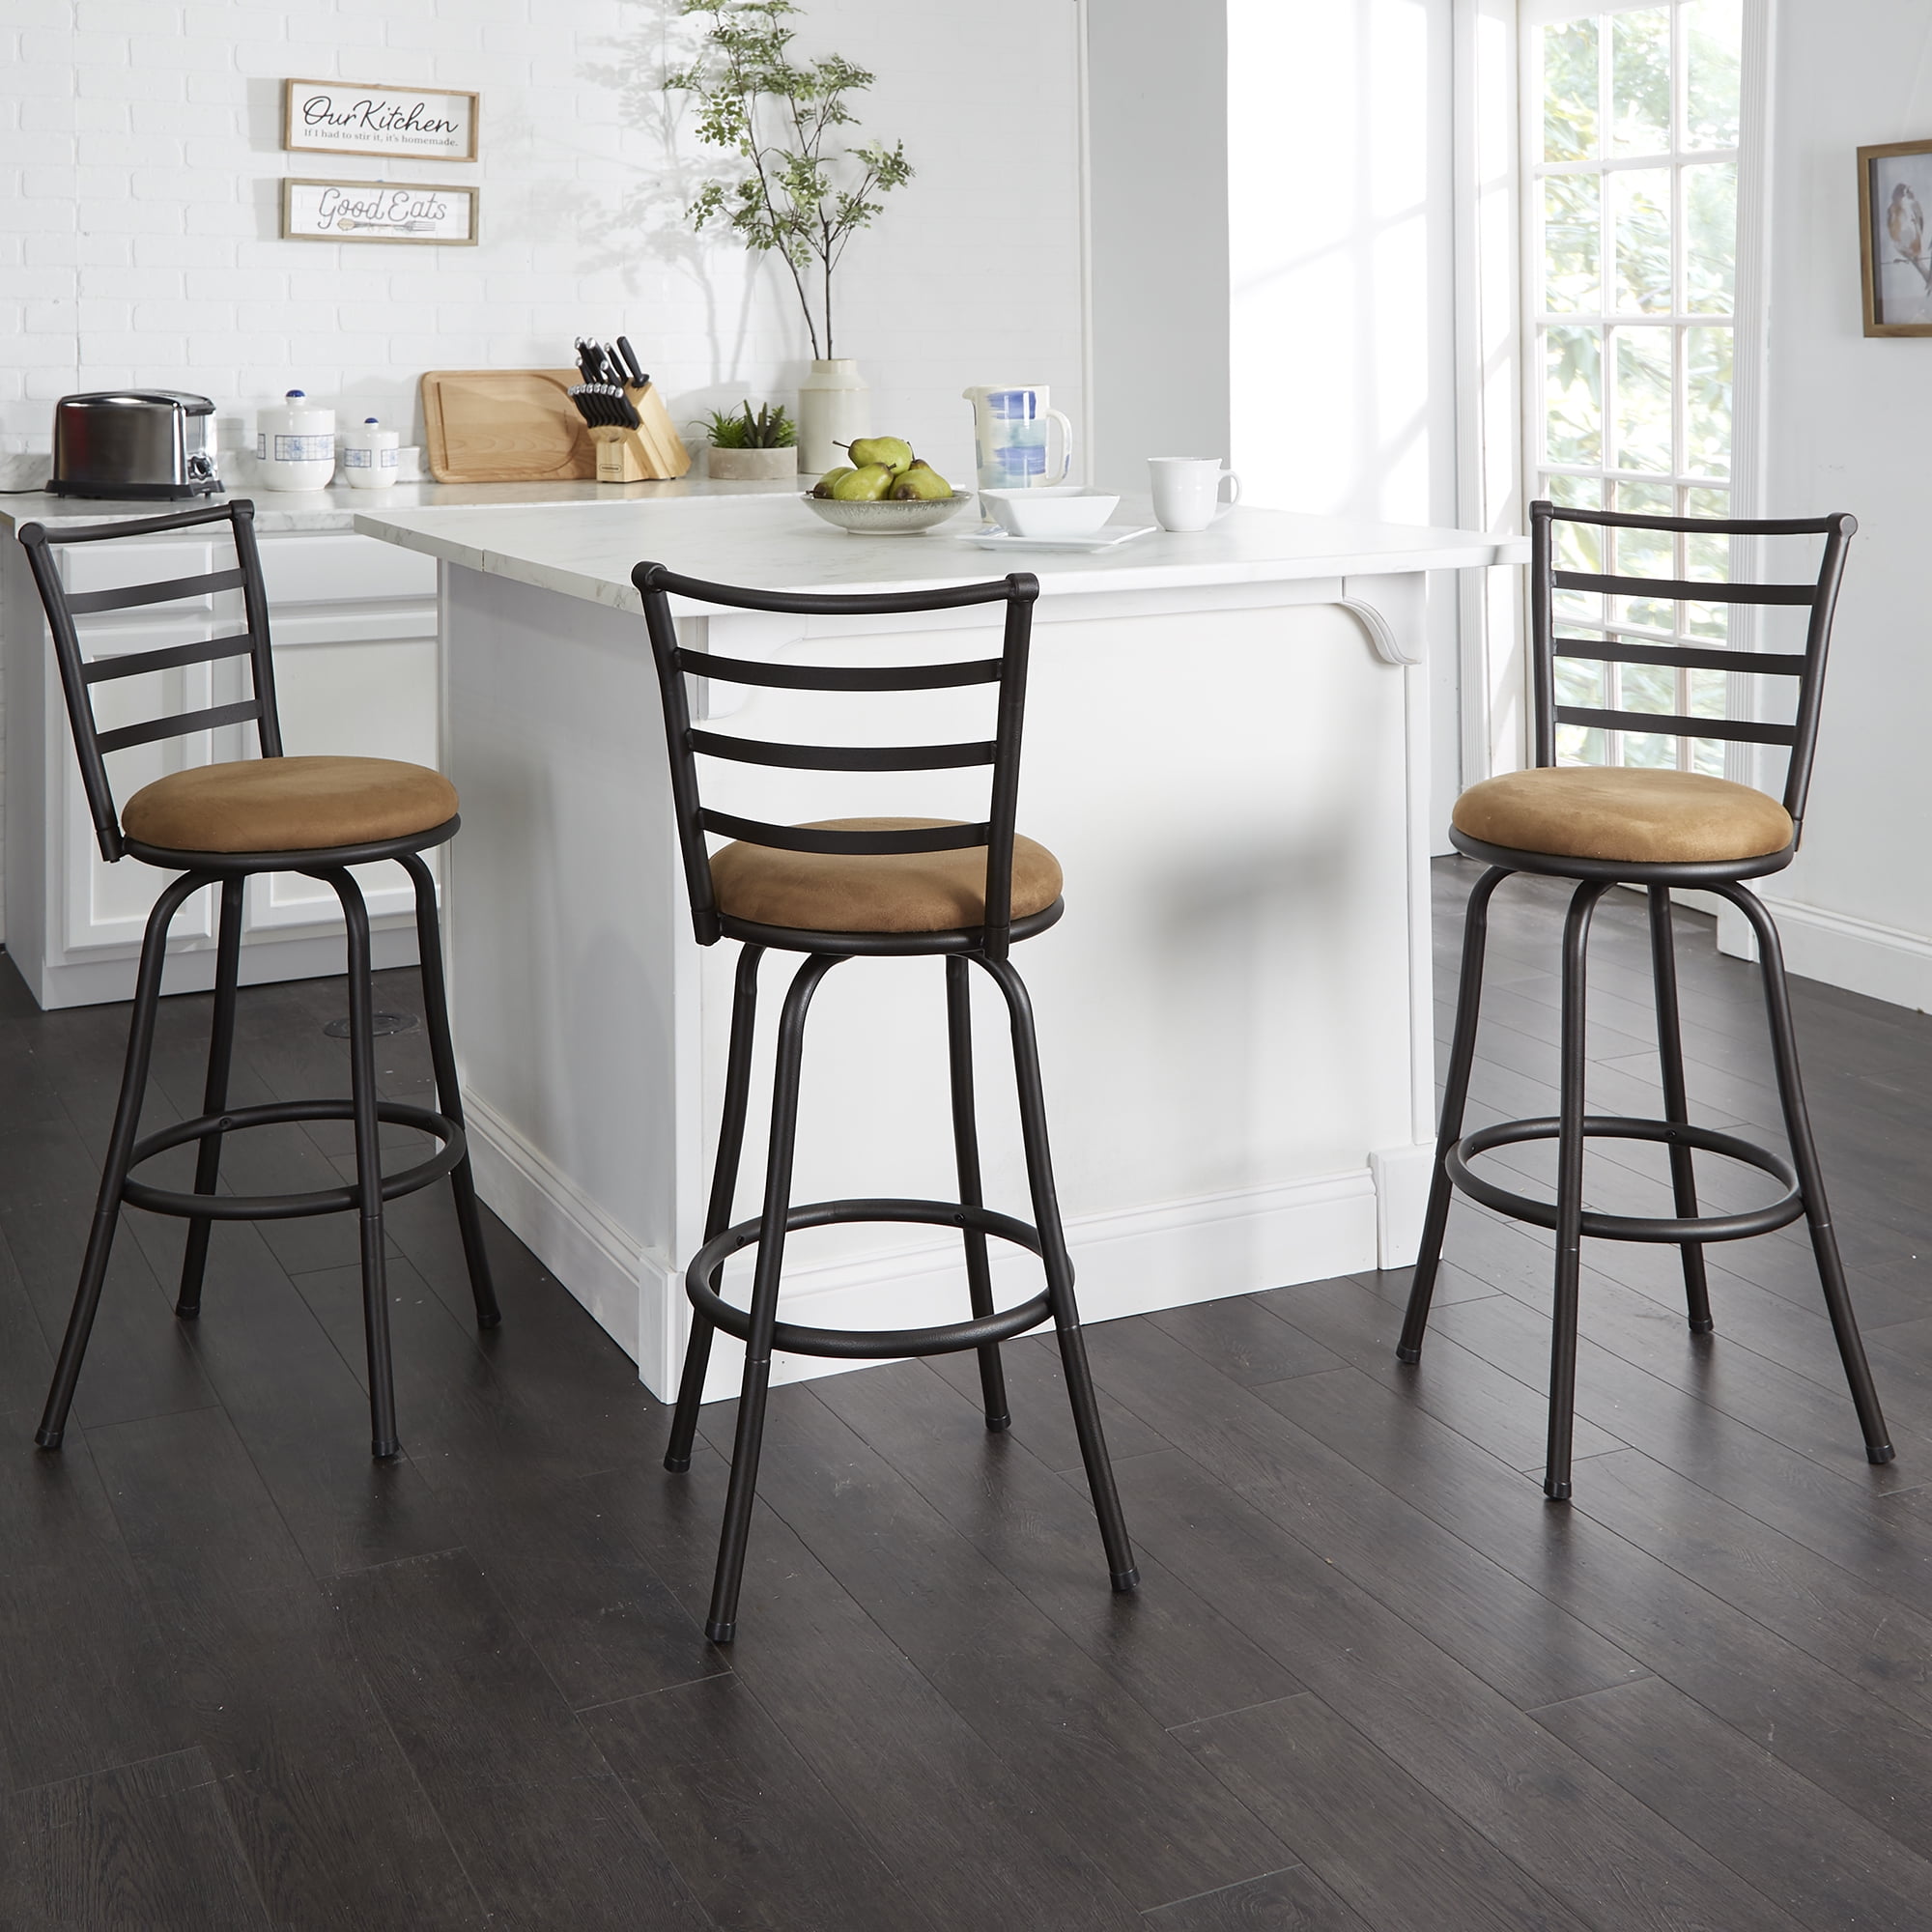 Adjustable Swivel Bar Stools for Kitchen Counter